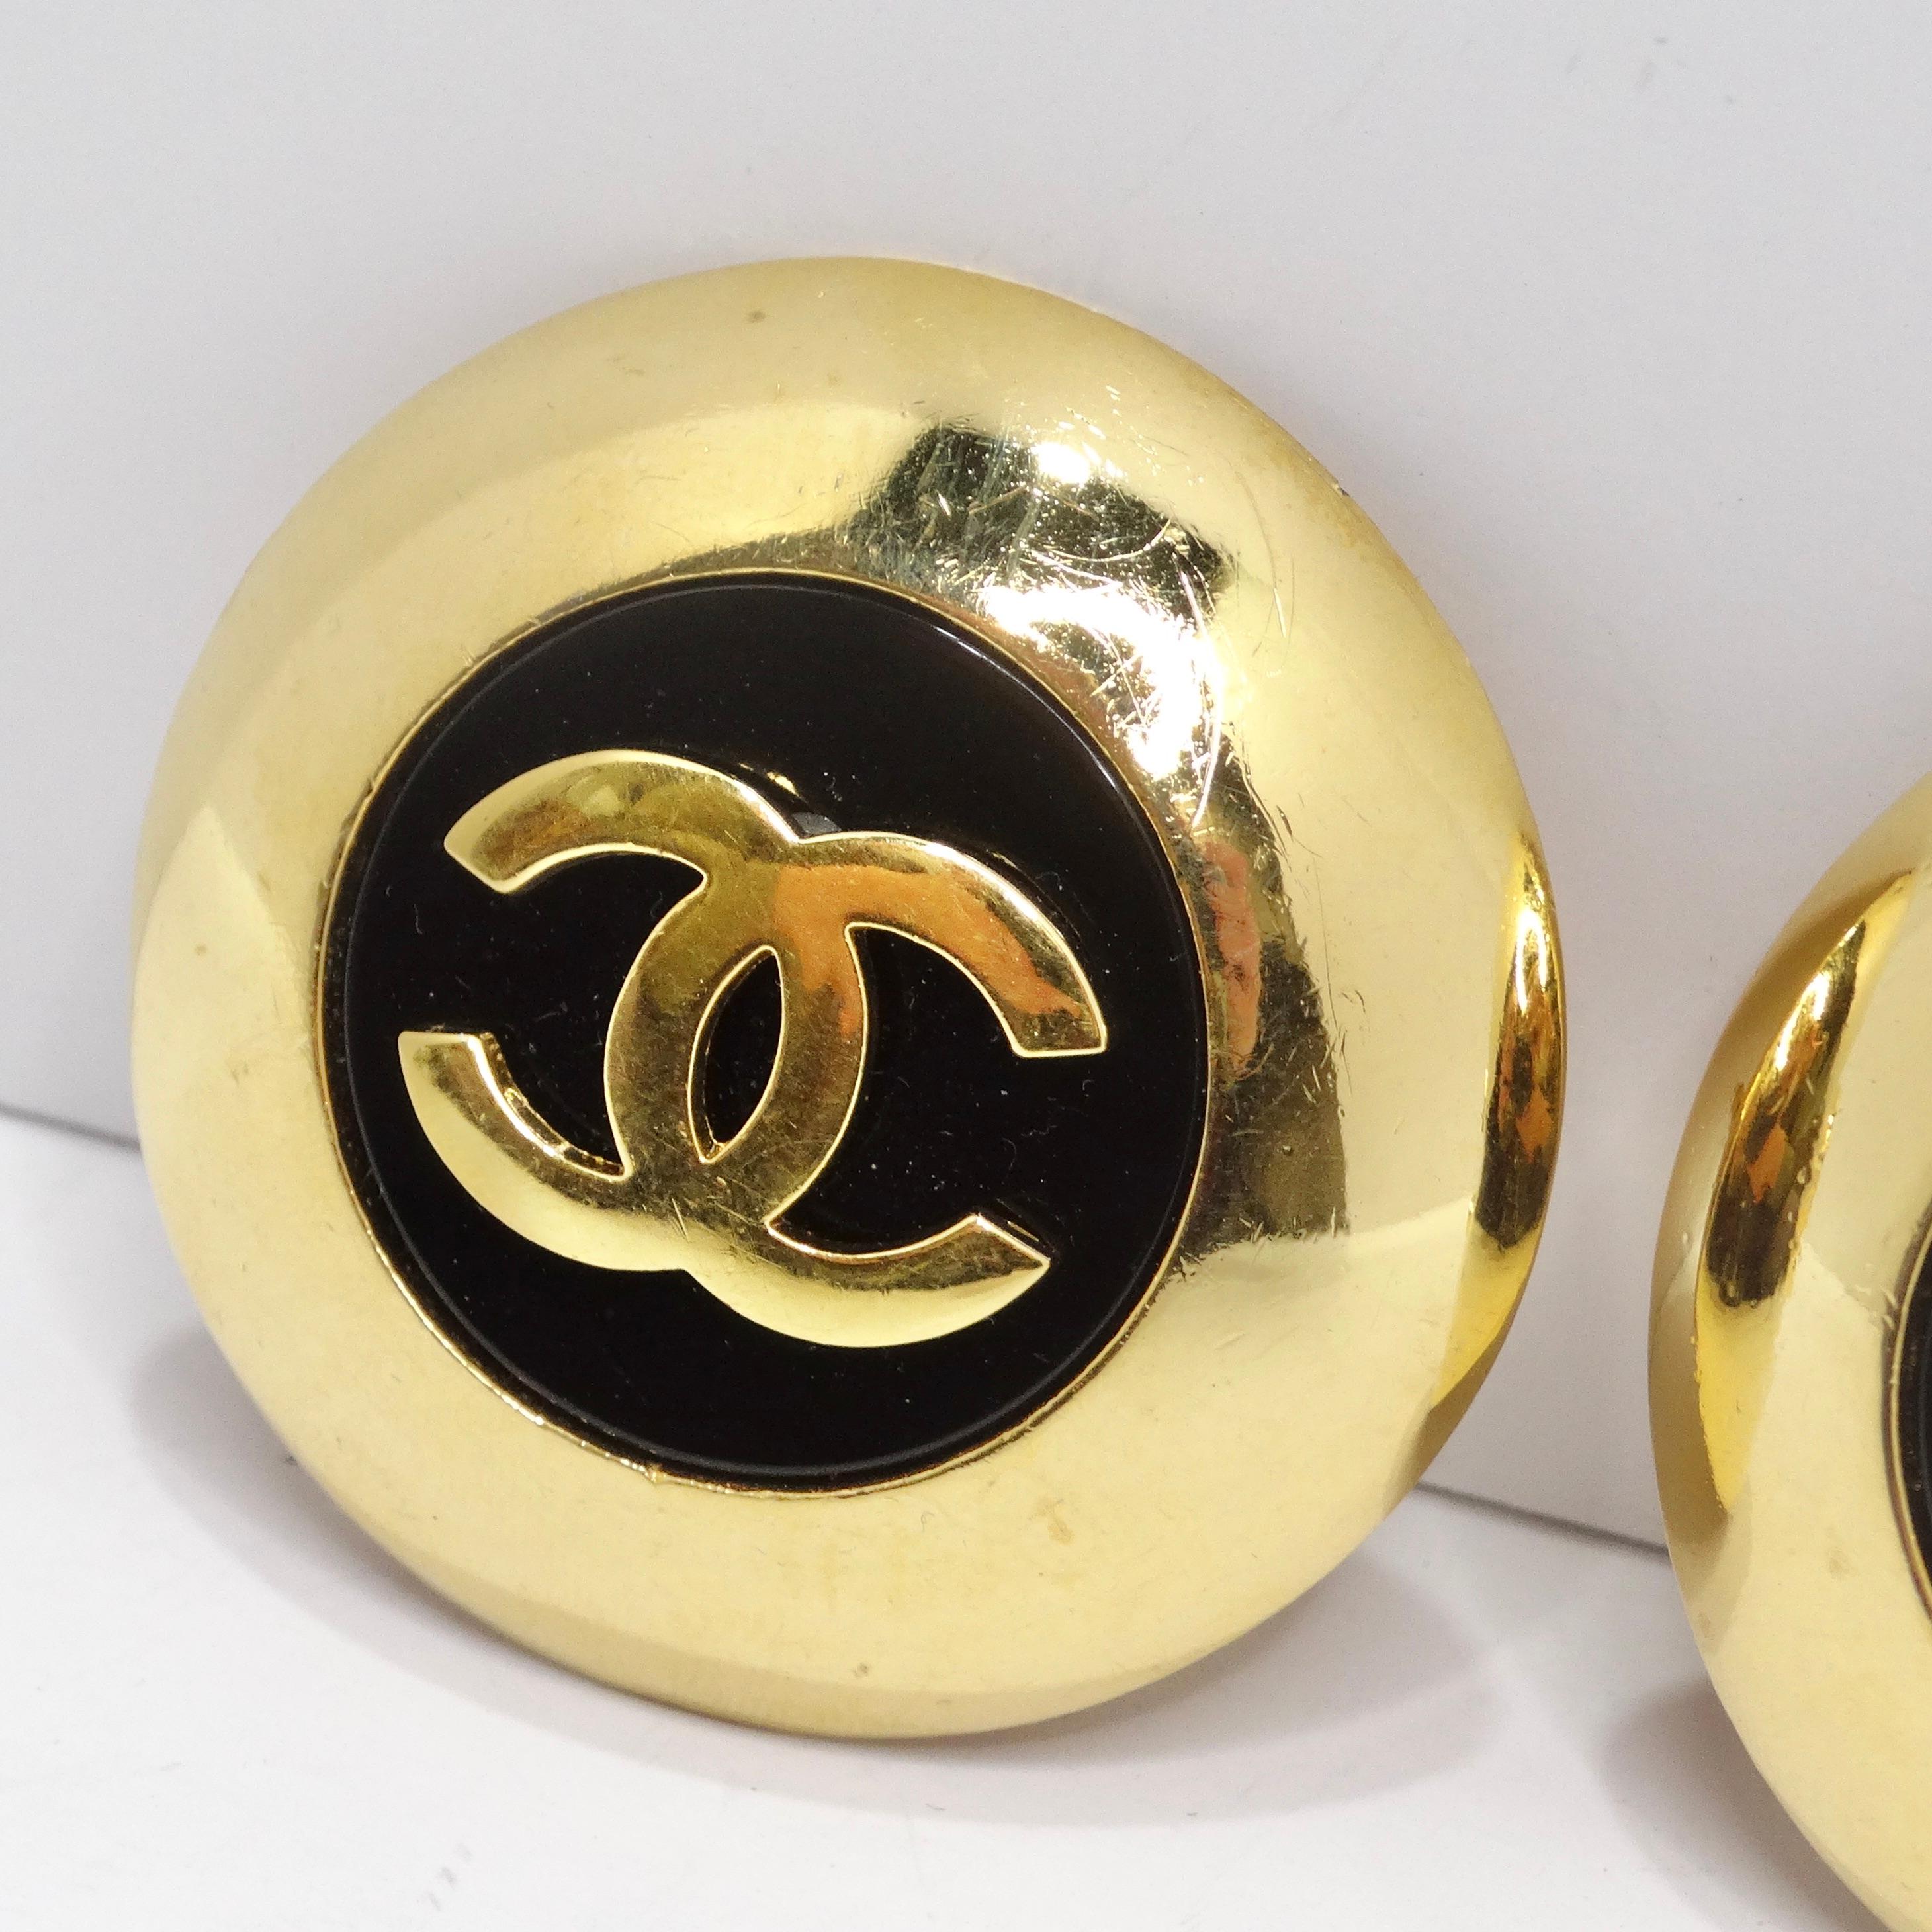 Step into the world of iconic elegance with the Chanel 1980s Jumbo Gold Plated Black CC Logo Clip-On Earrings – jumbo disc-shaped earrings that are a true testament to the glamour of 80s Chanel. These statement earrings feature gold-plated discs